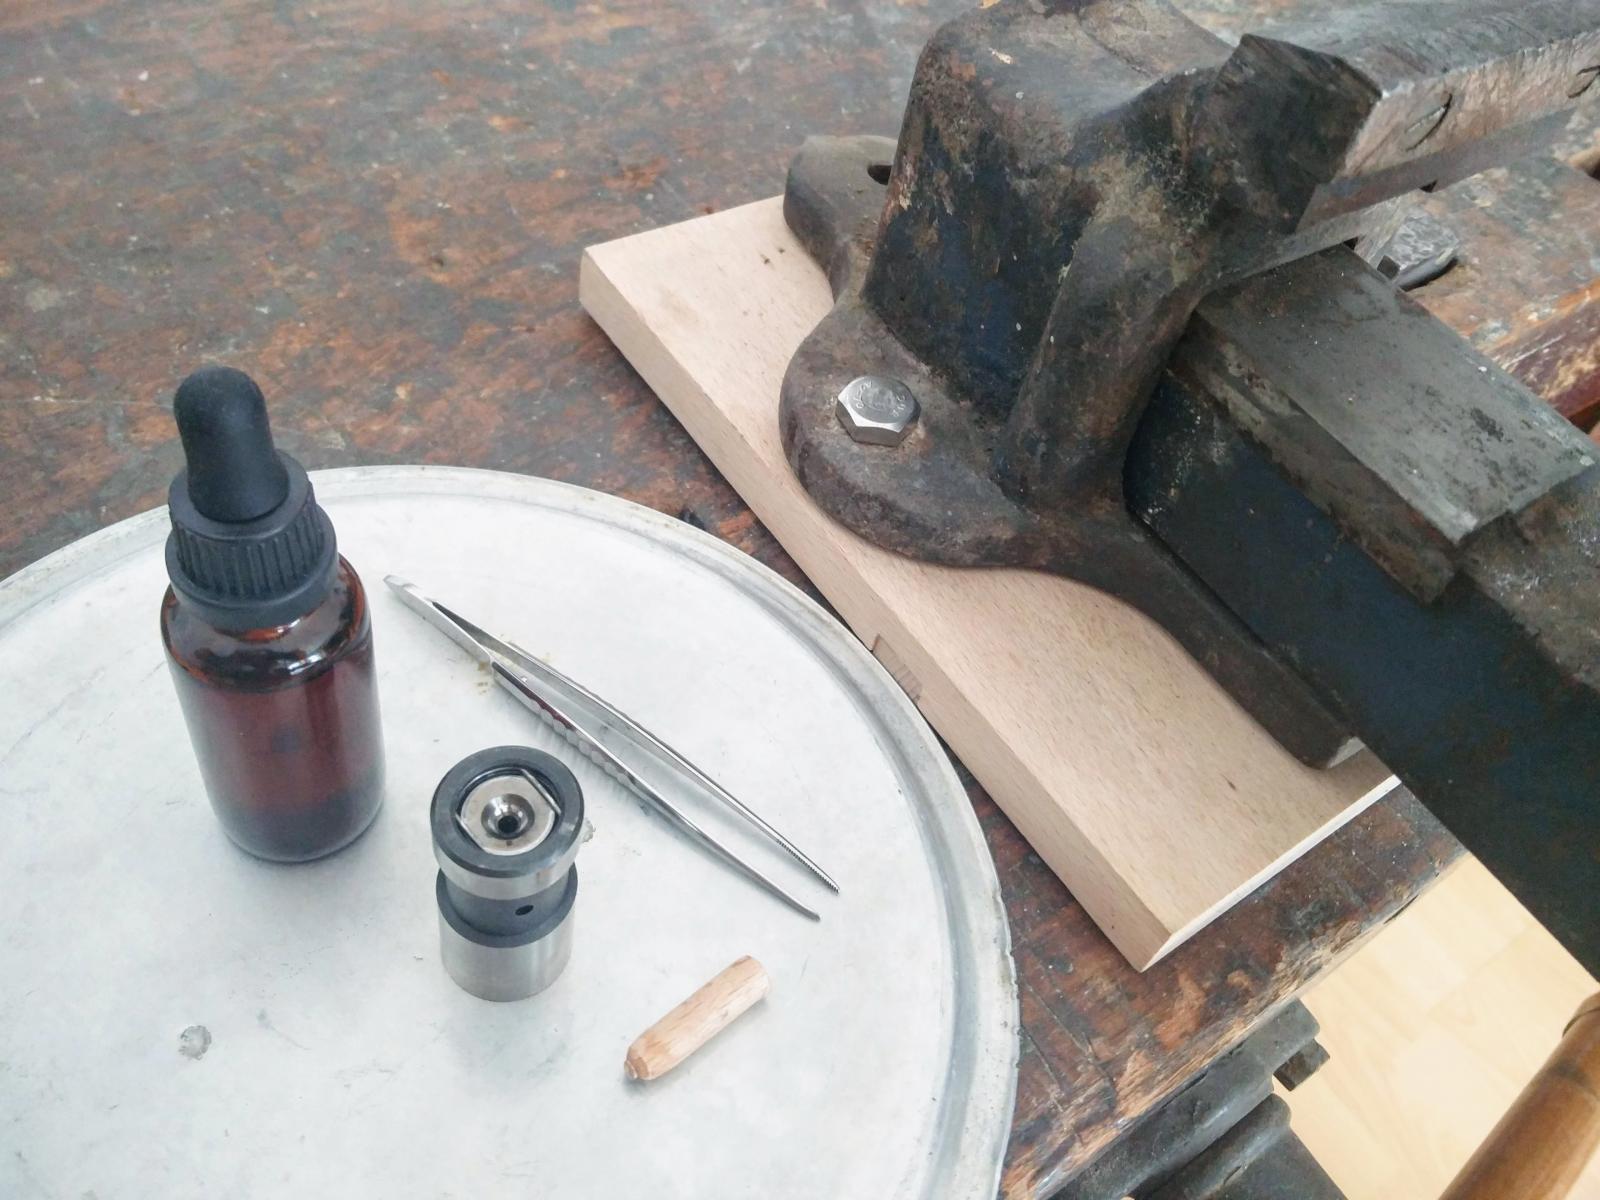 How to bench bleed hydraulic valve lifters